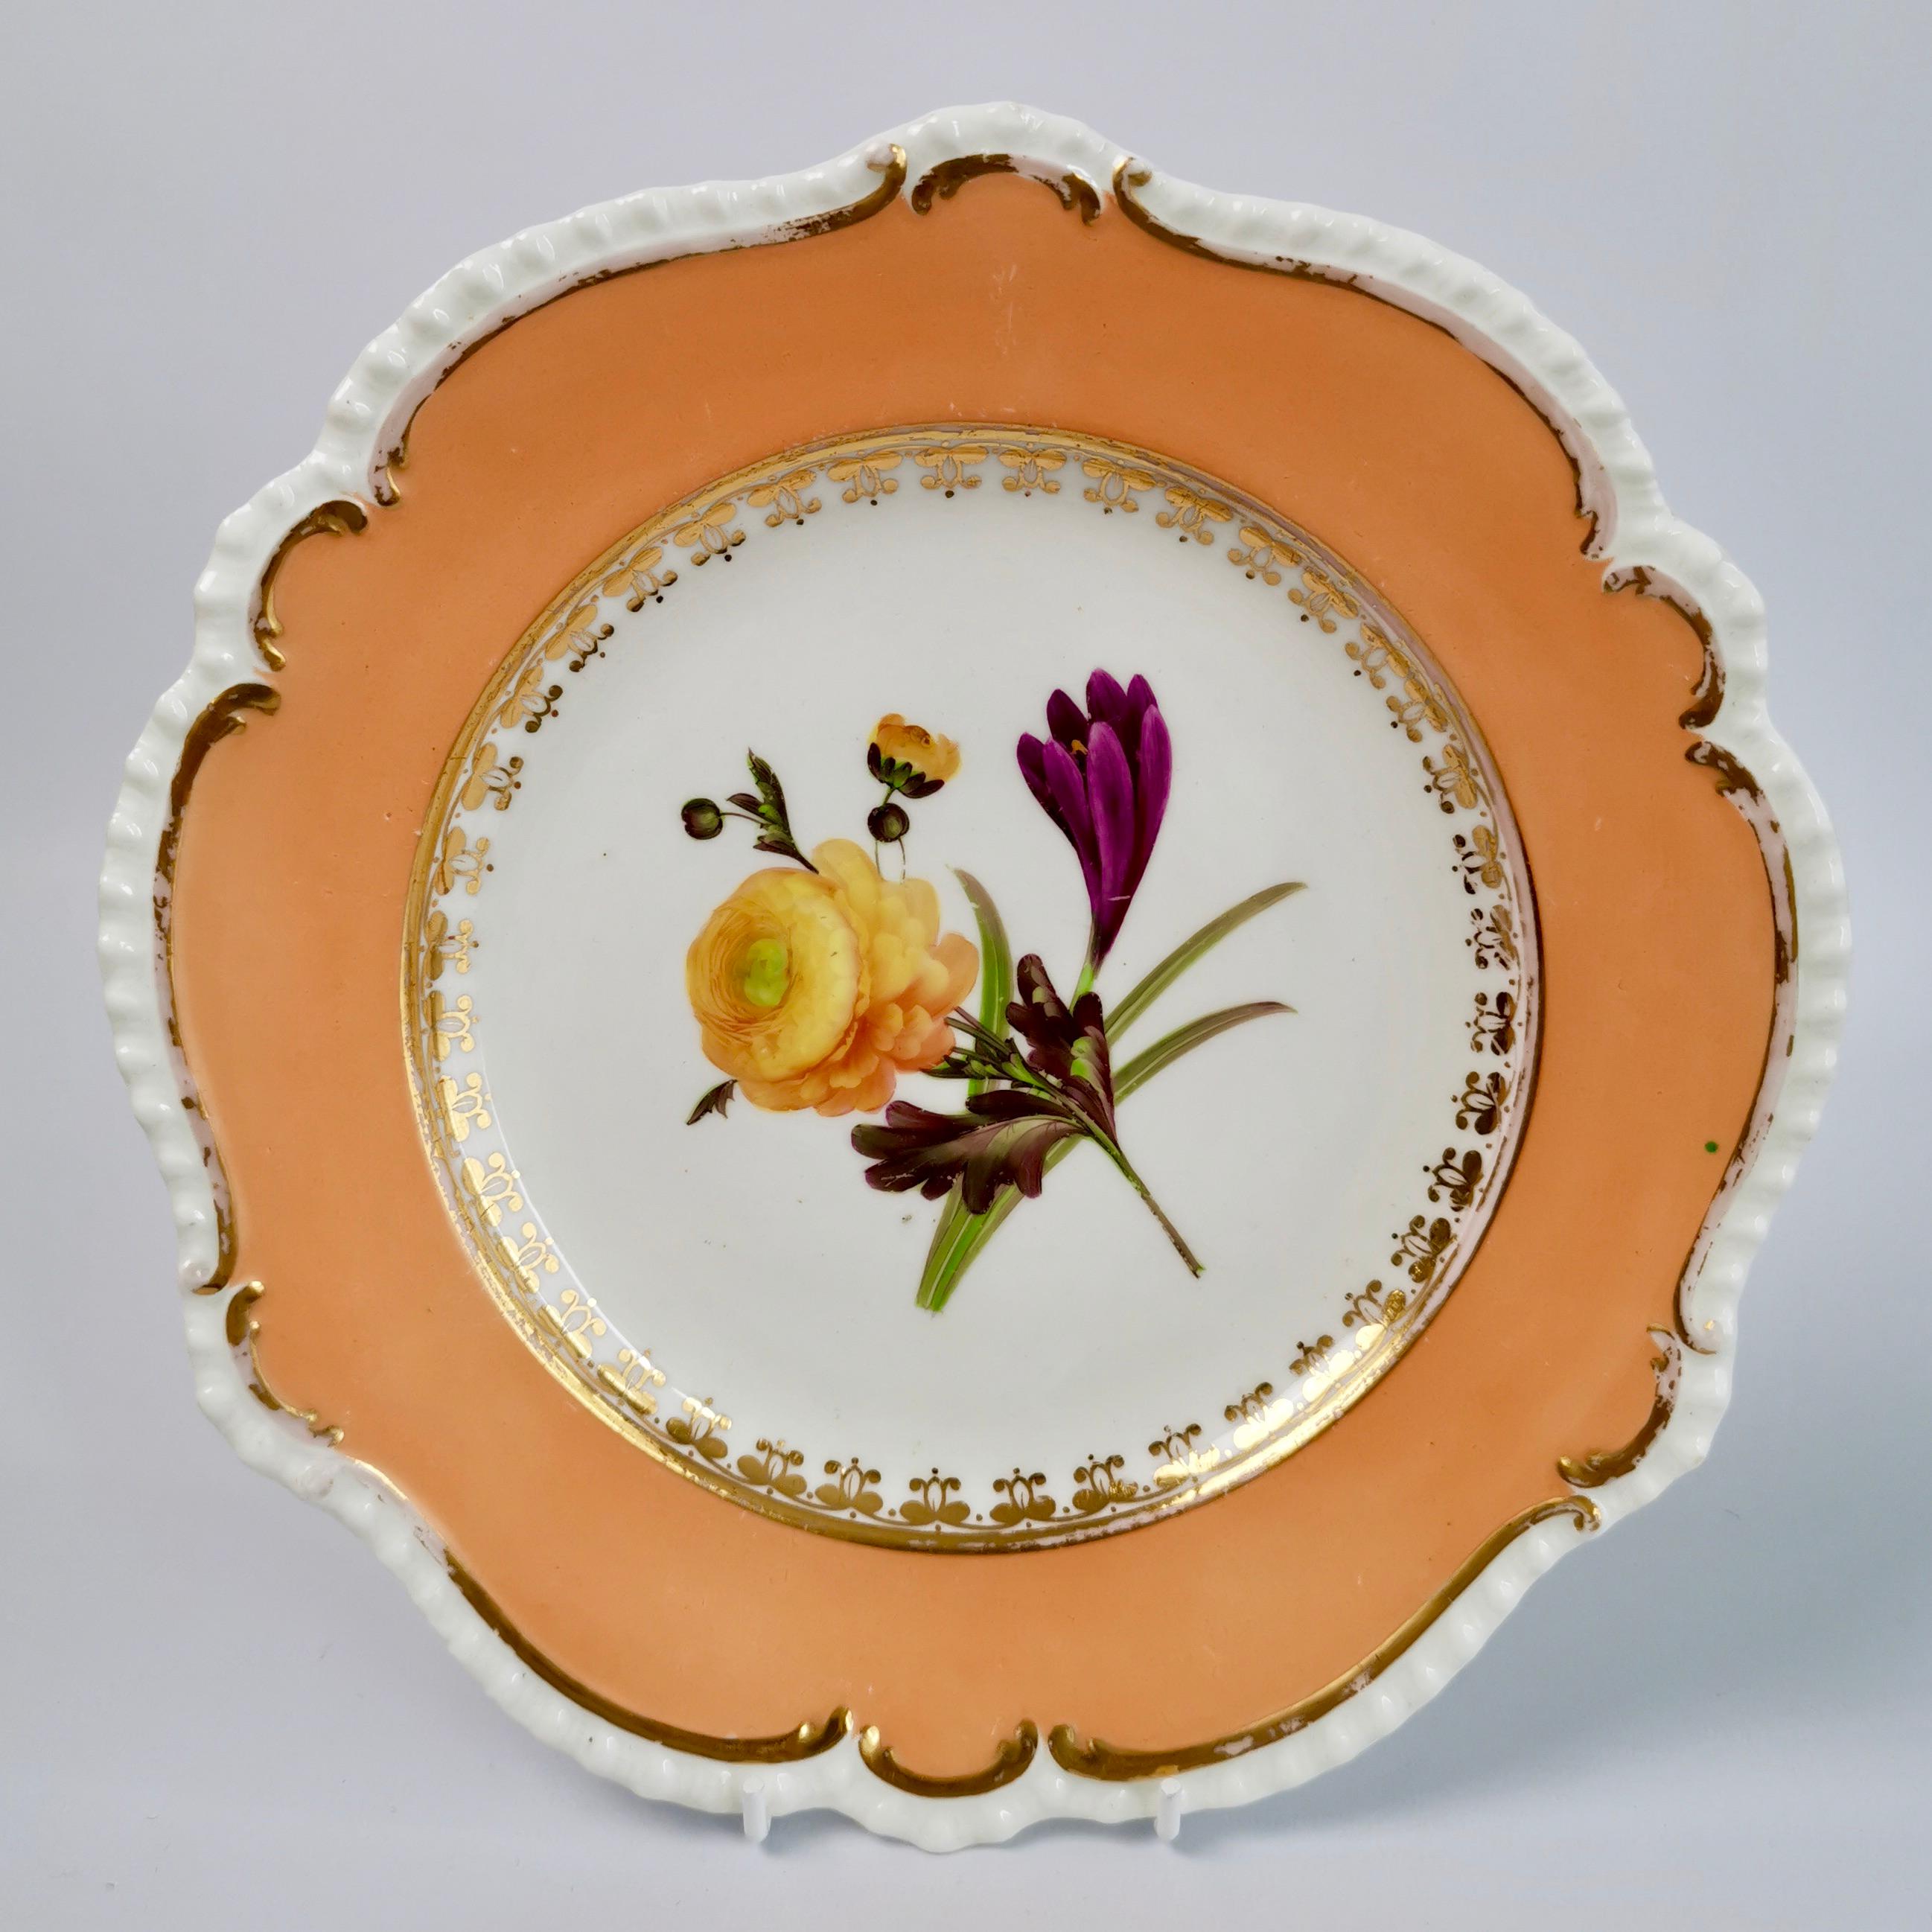 Early 19th Century Set of 8 Plates Coalport, Peach with Flowers, Porcelain Regency 1820-1825